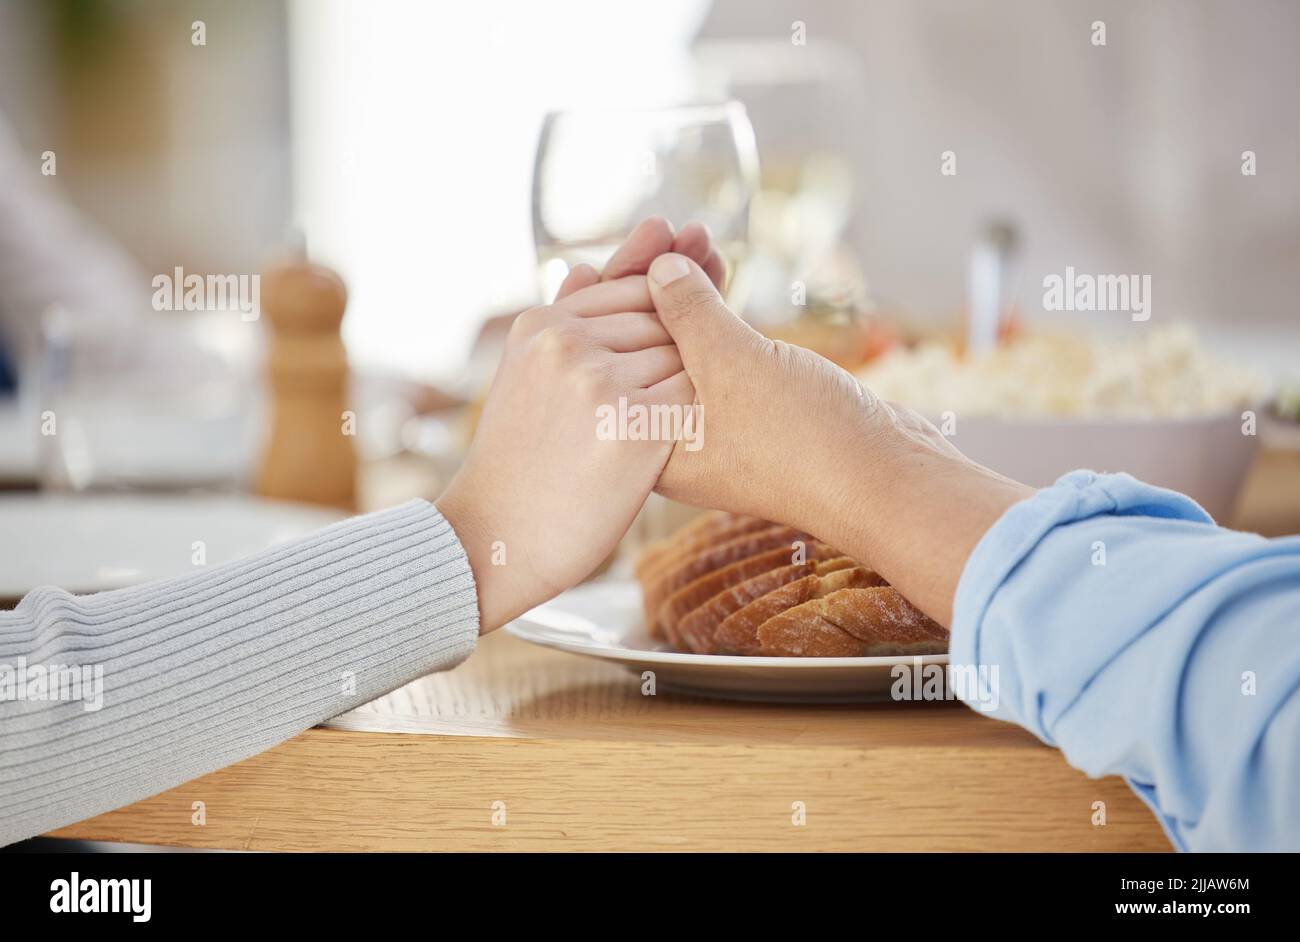 Families that pray together, enter heaven together. two unrecognizable people holding hands at the dinner table at home. Stock Photo